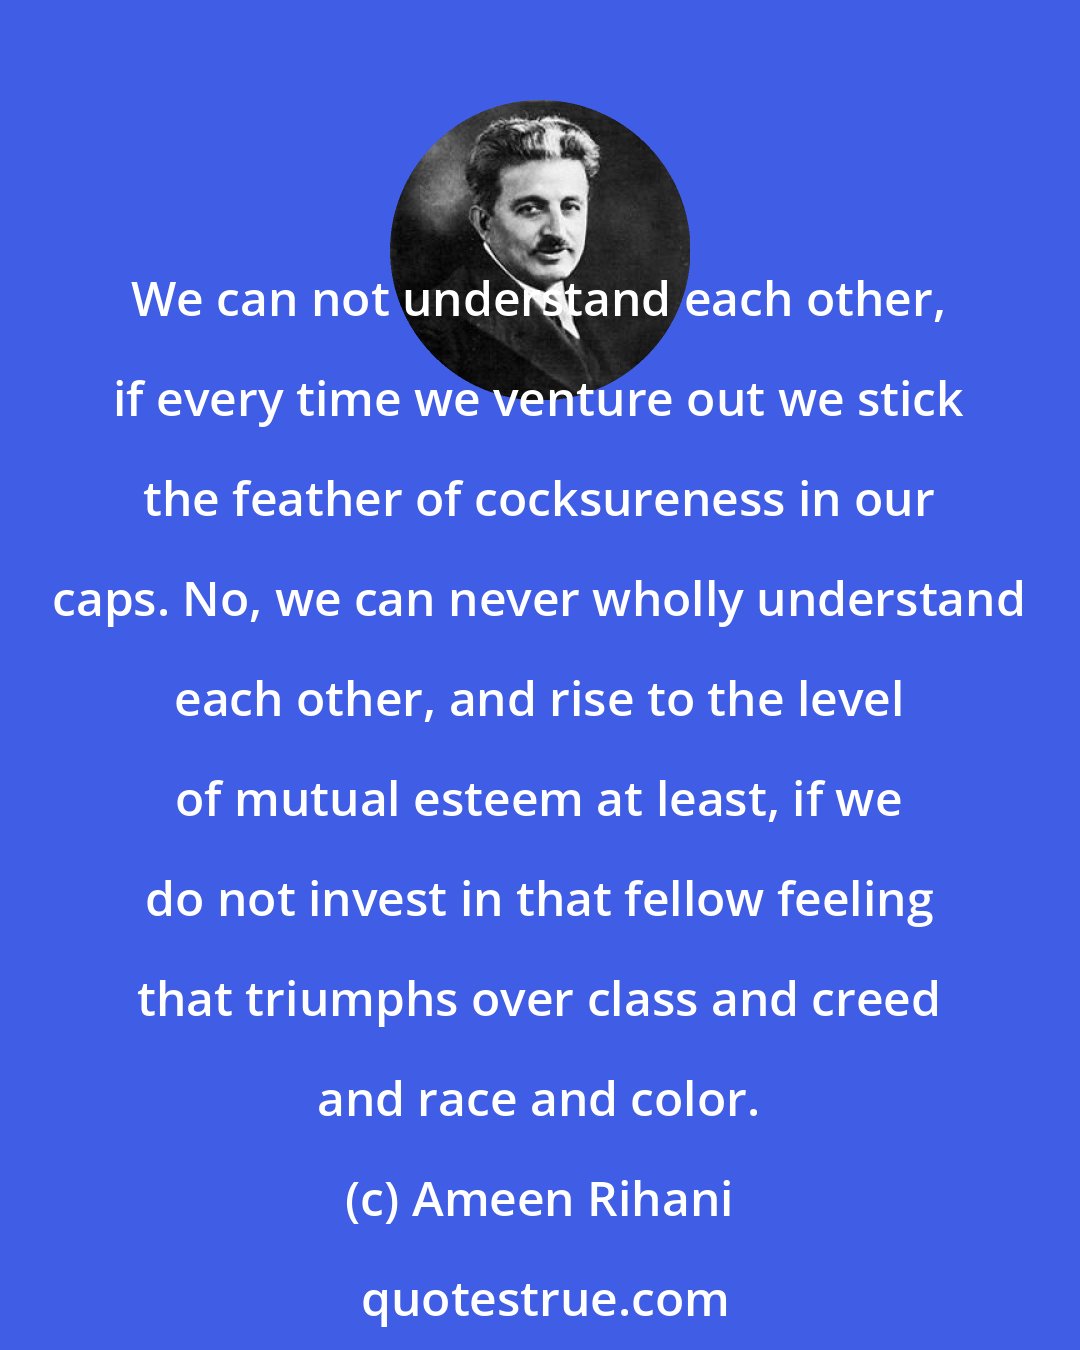 Ameen Rihani: We can not understand each other, if every time we venture out we stick the feather of cocksureness in our caps. No, we can never wholly understand each other, and rise to the level of mutual esteem at least, if we do not invest in that fellow feeling that triumphs over class and creed and race and color.